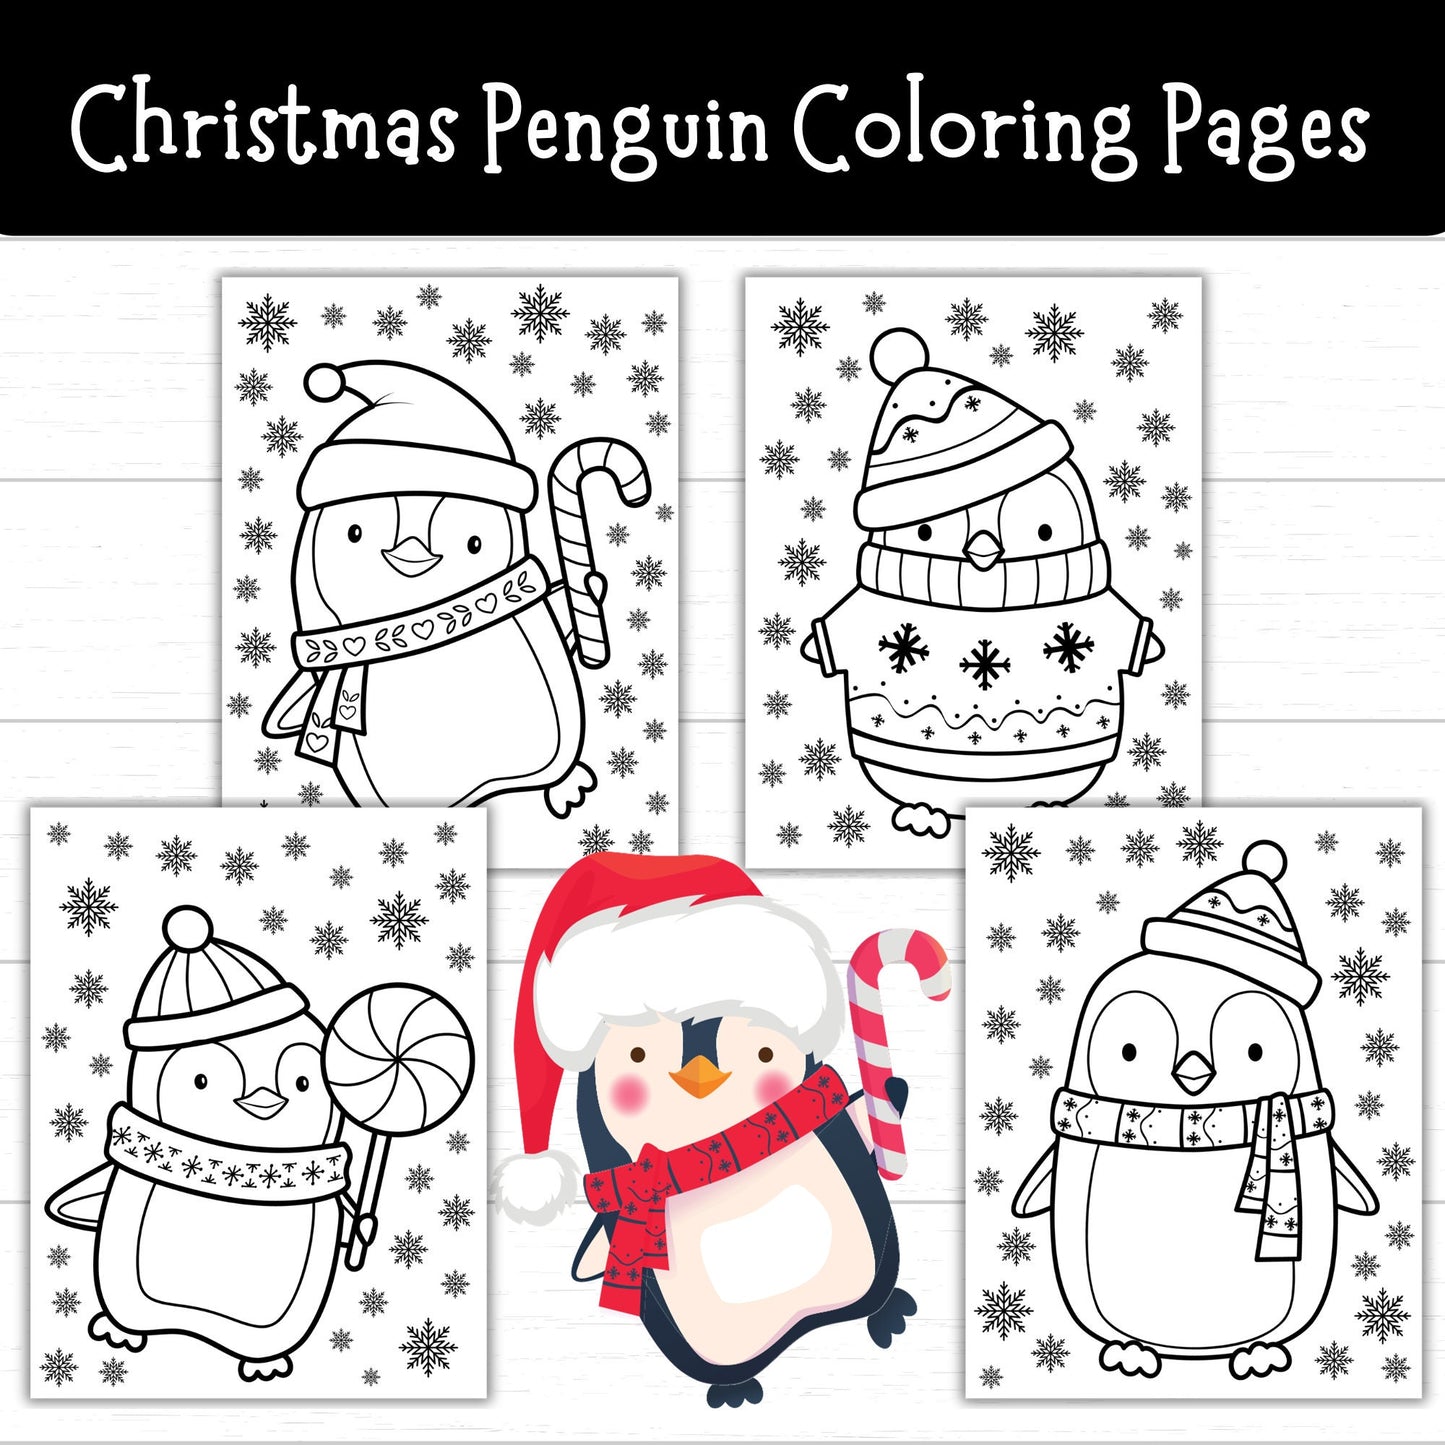 Christmas Penguin Coloring Pages, Winter Penguin Coloring Pages, Penguin Coloring Pages, Christmas Coloring Pages, Winter Coloring Pages